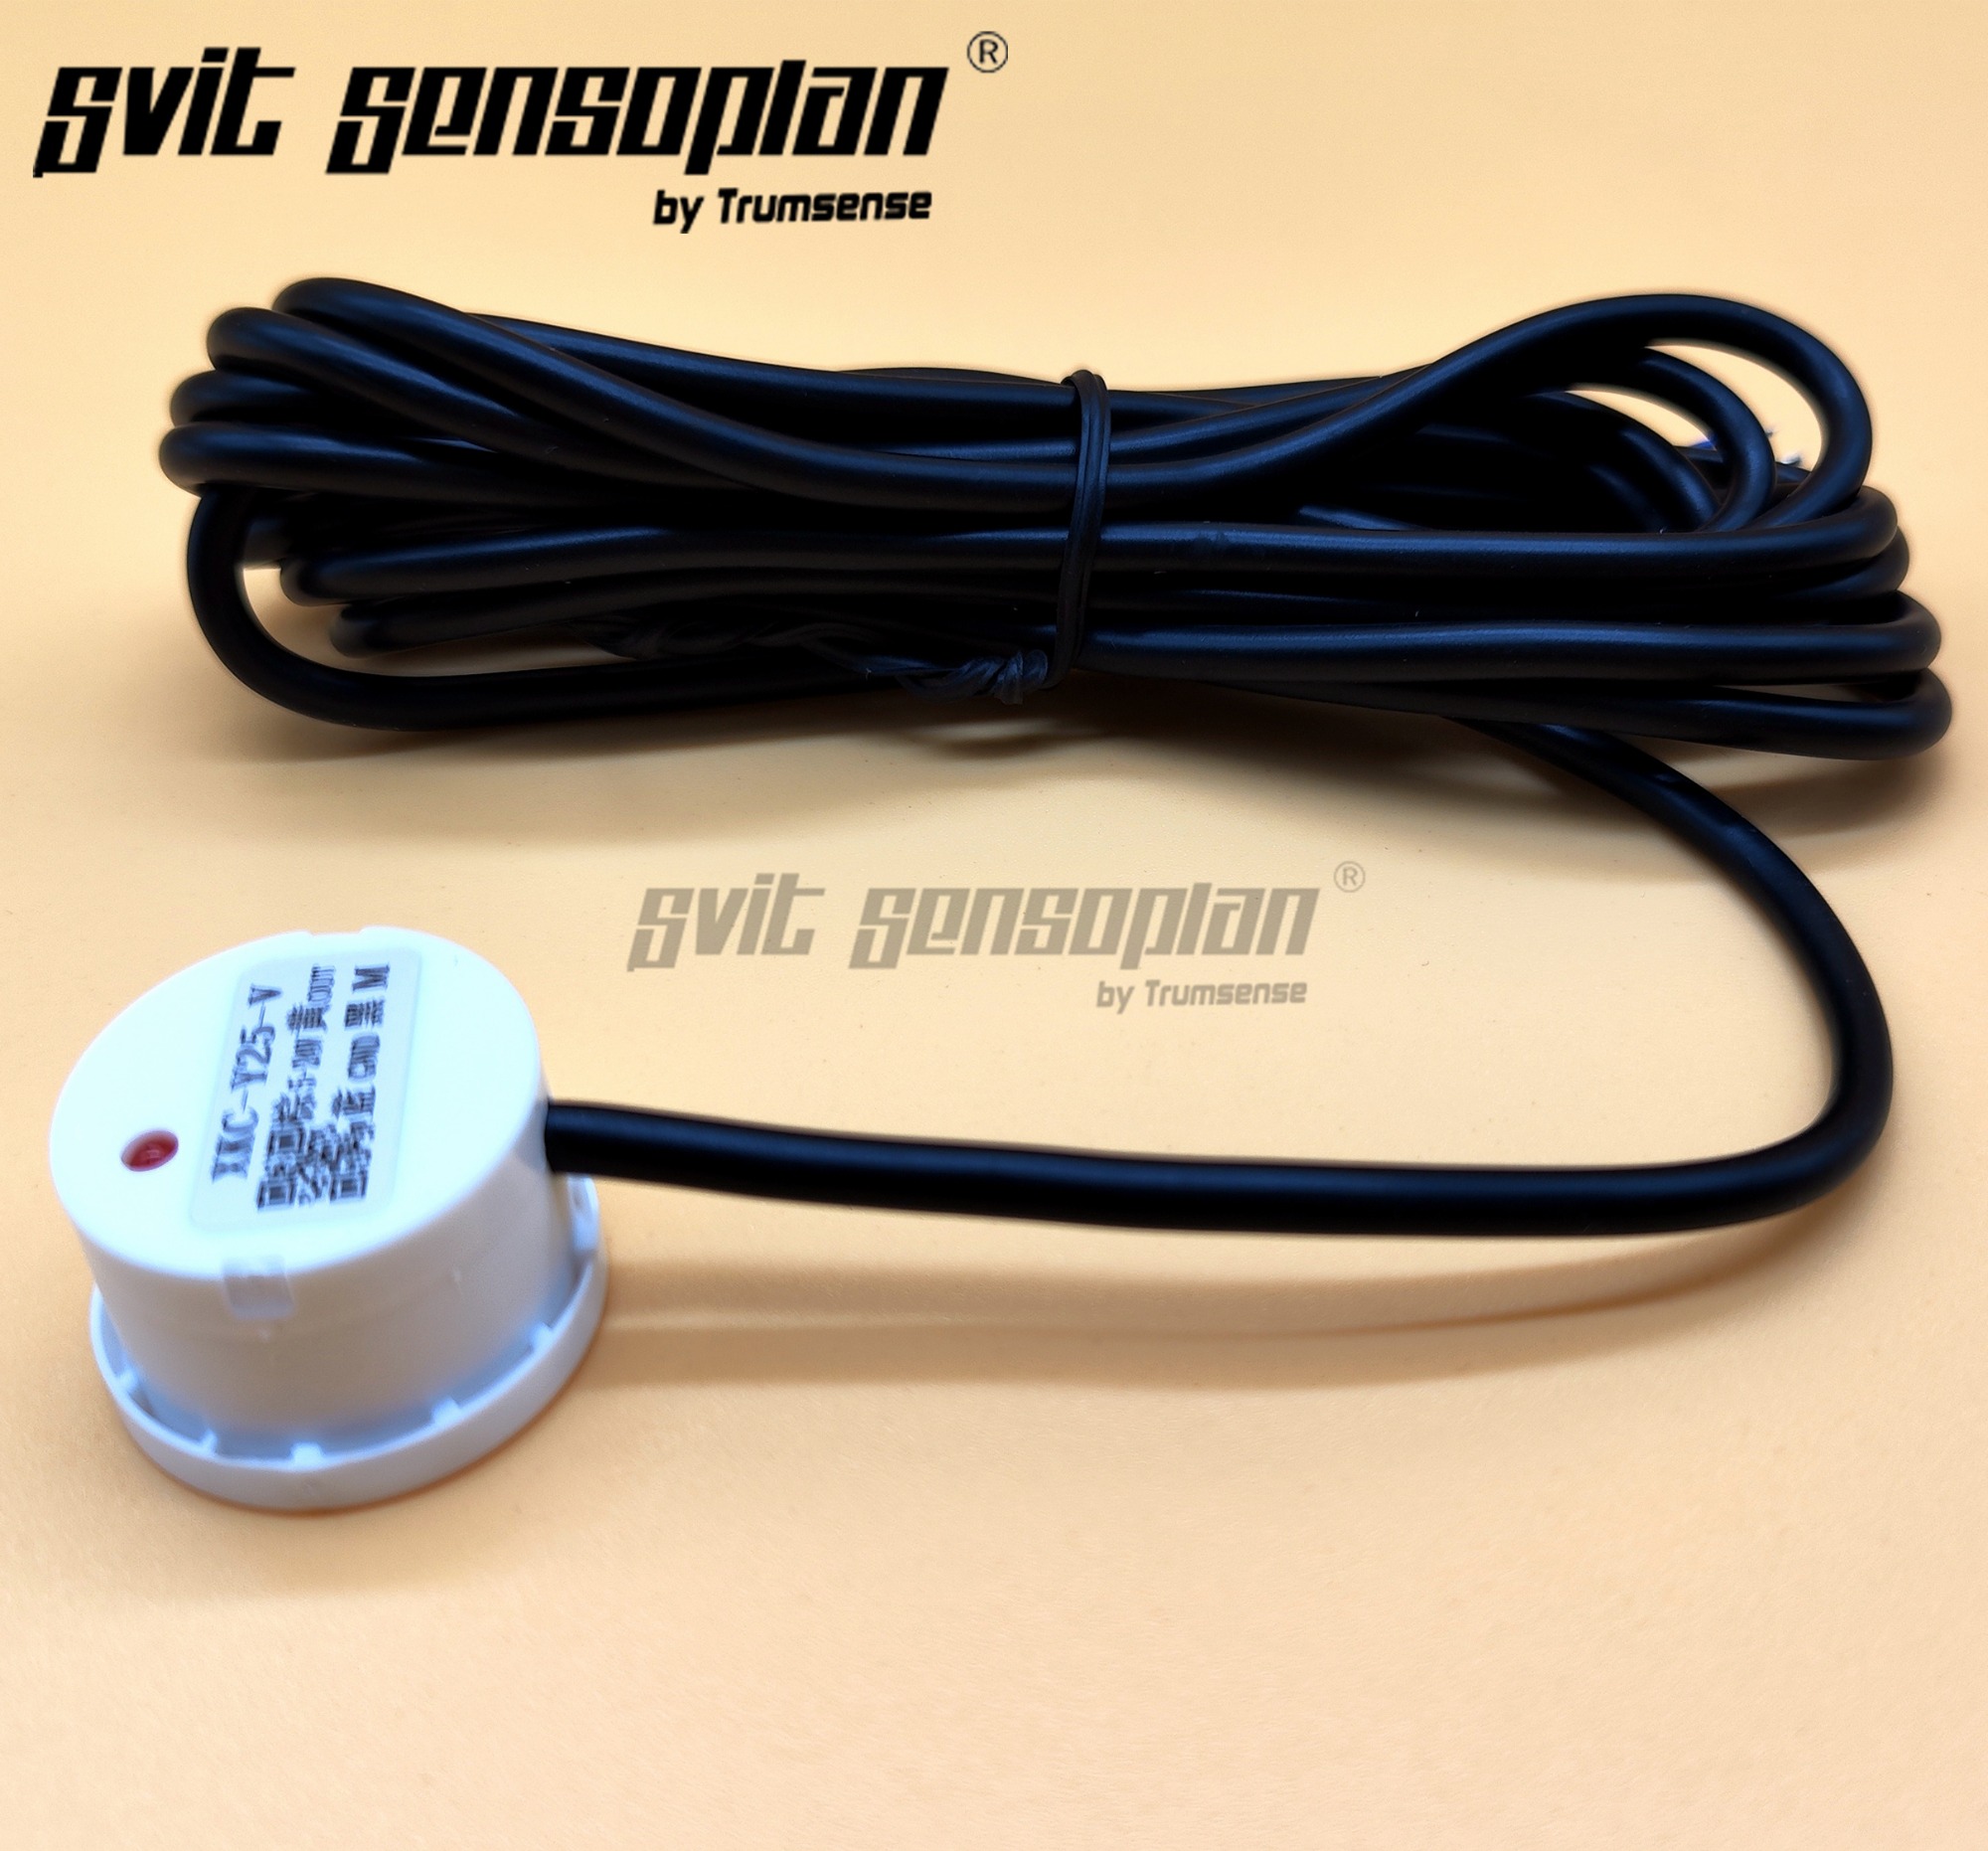 Trumsense XKC-Y25-V 5 to 24V Contactless Water Level Sensor 2m Length Cable No need Touch Liquid for Coffee Machine